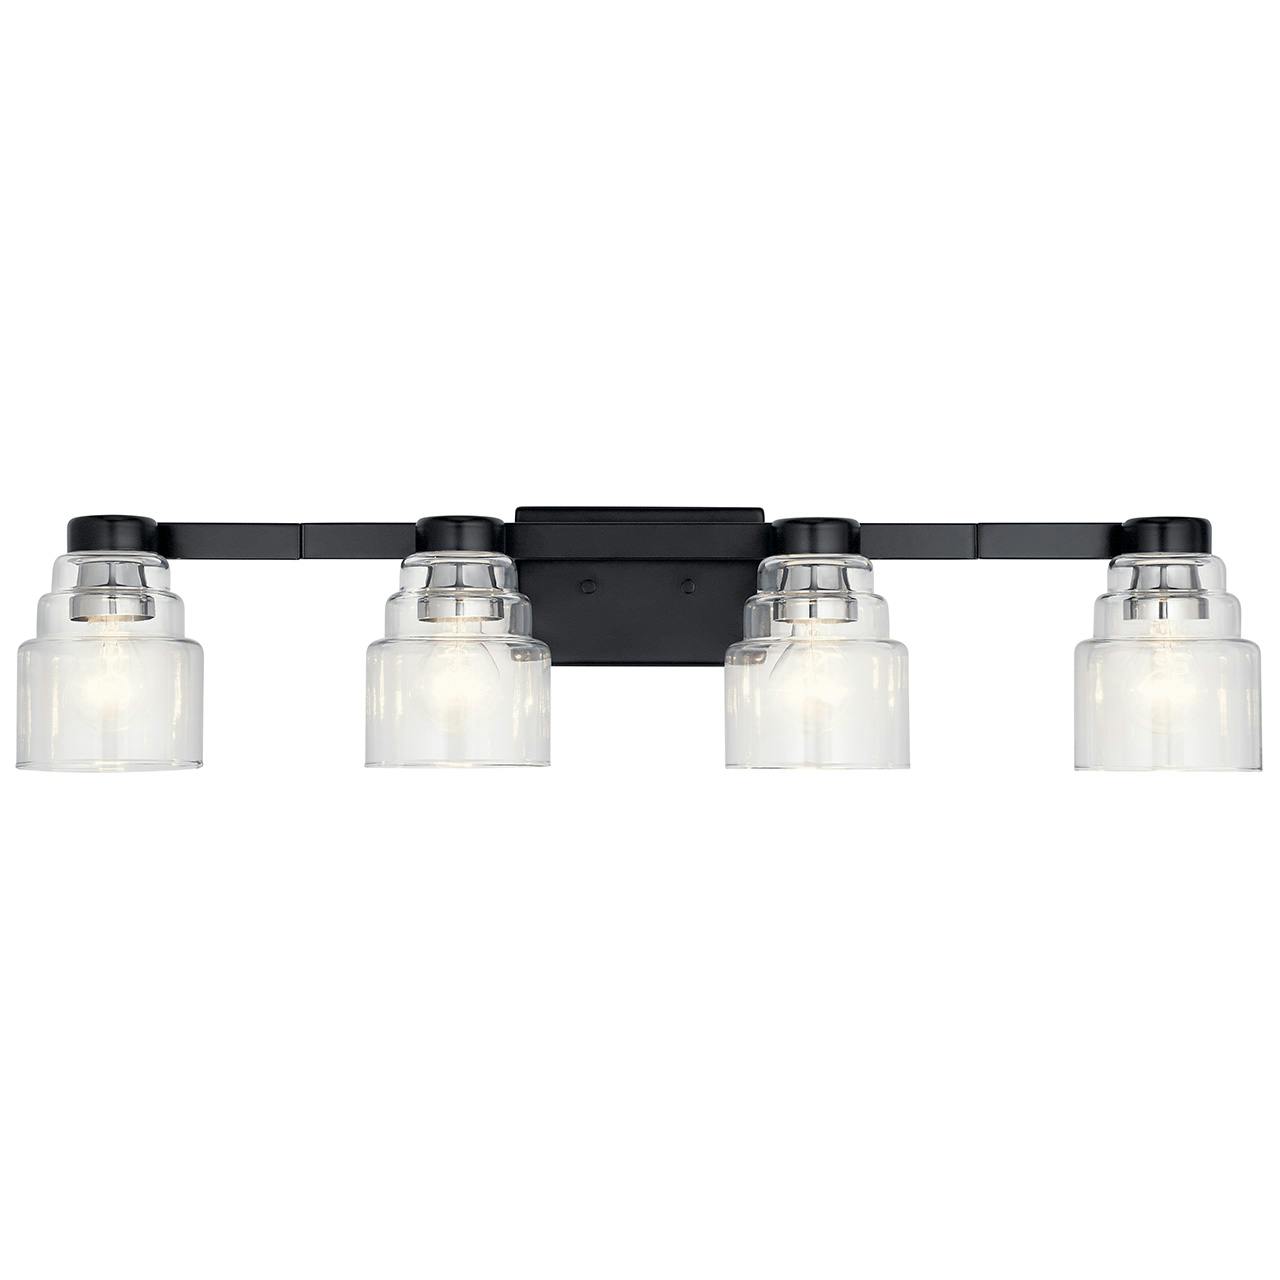 The Vionnet 33.5" Vanity Light in Black facing down on a white background